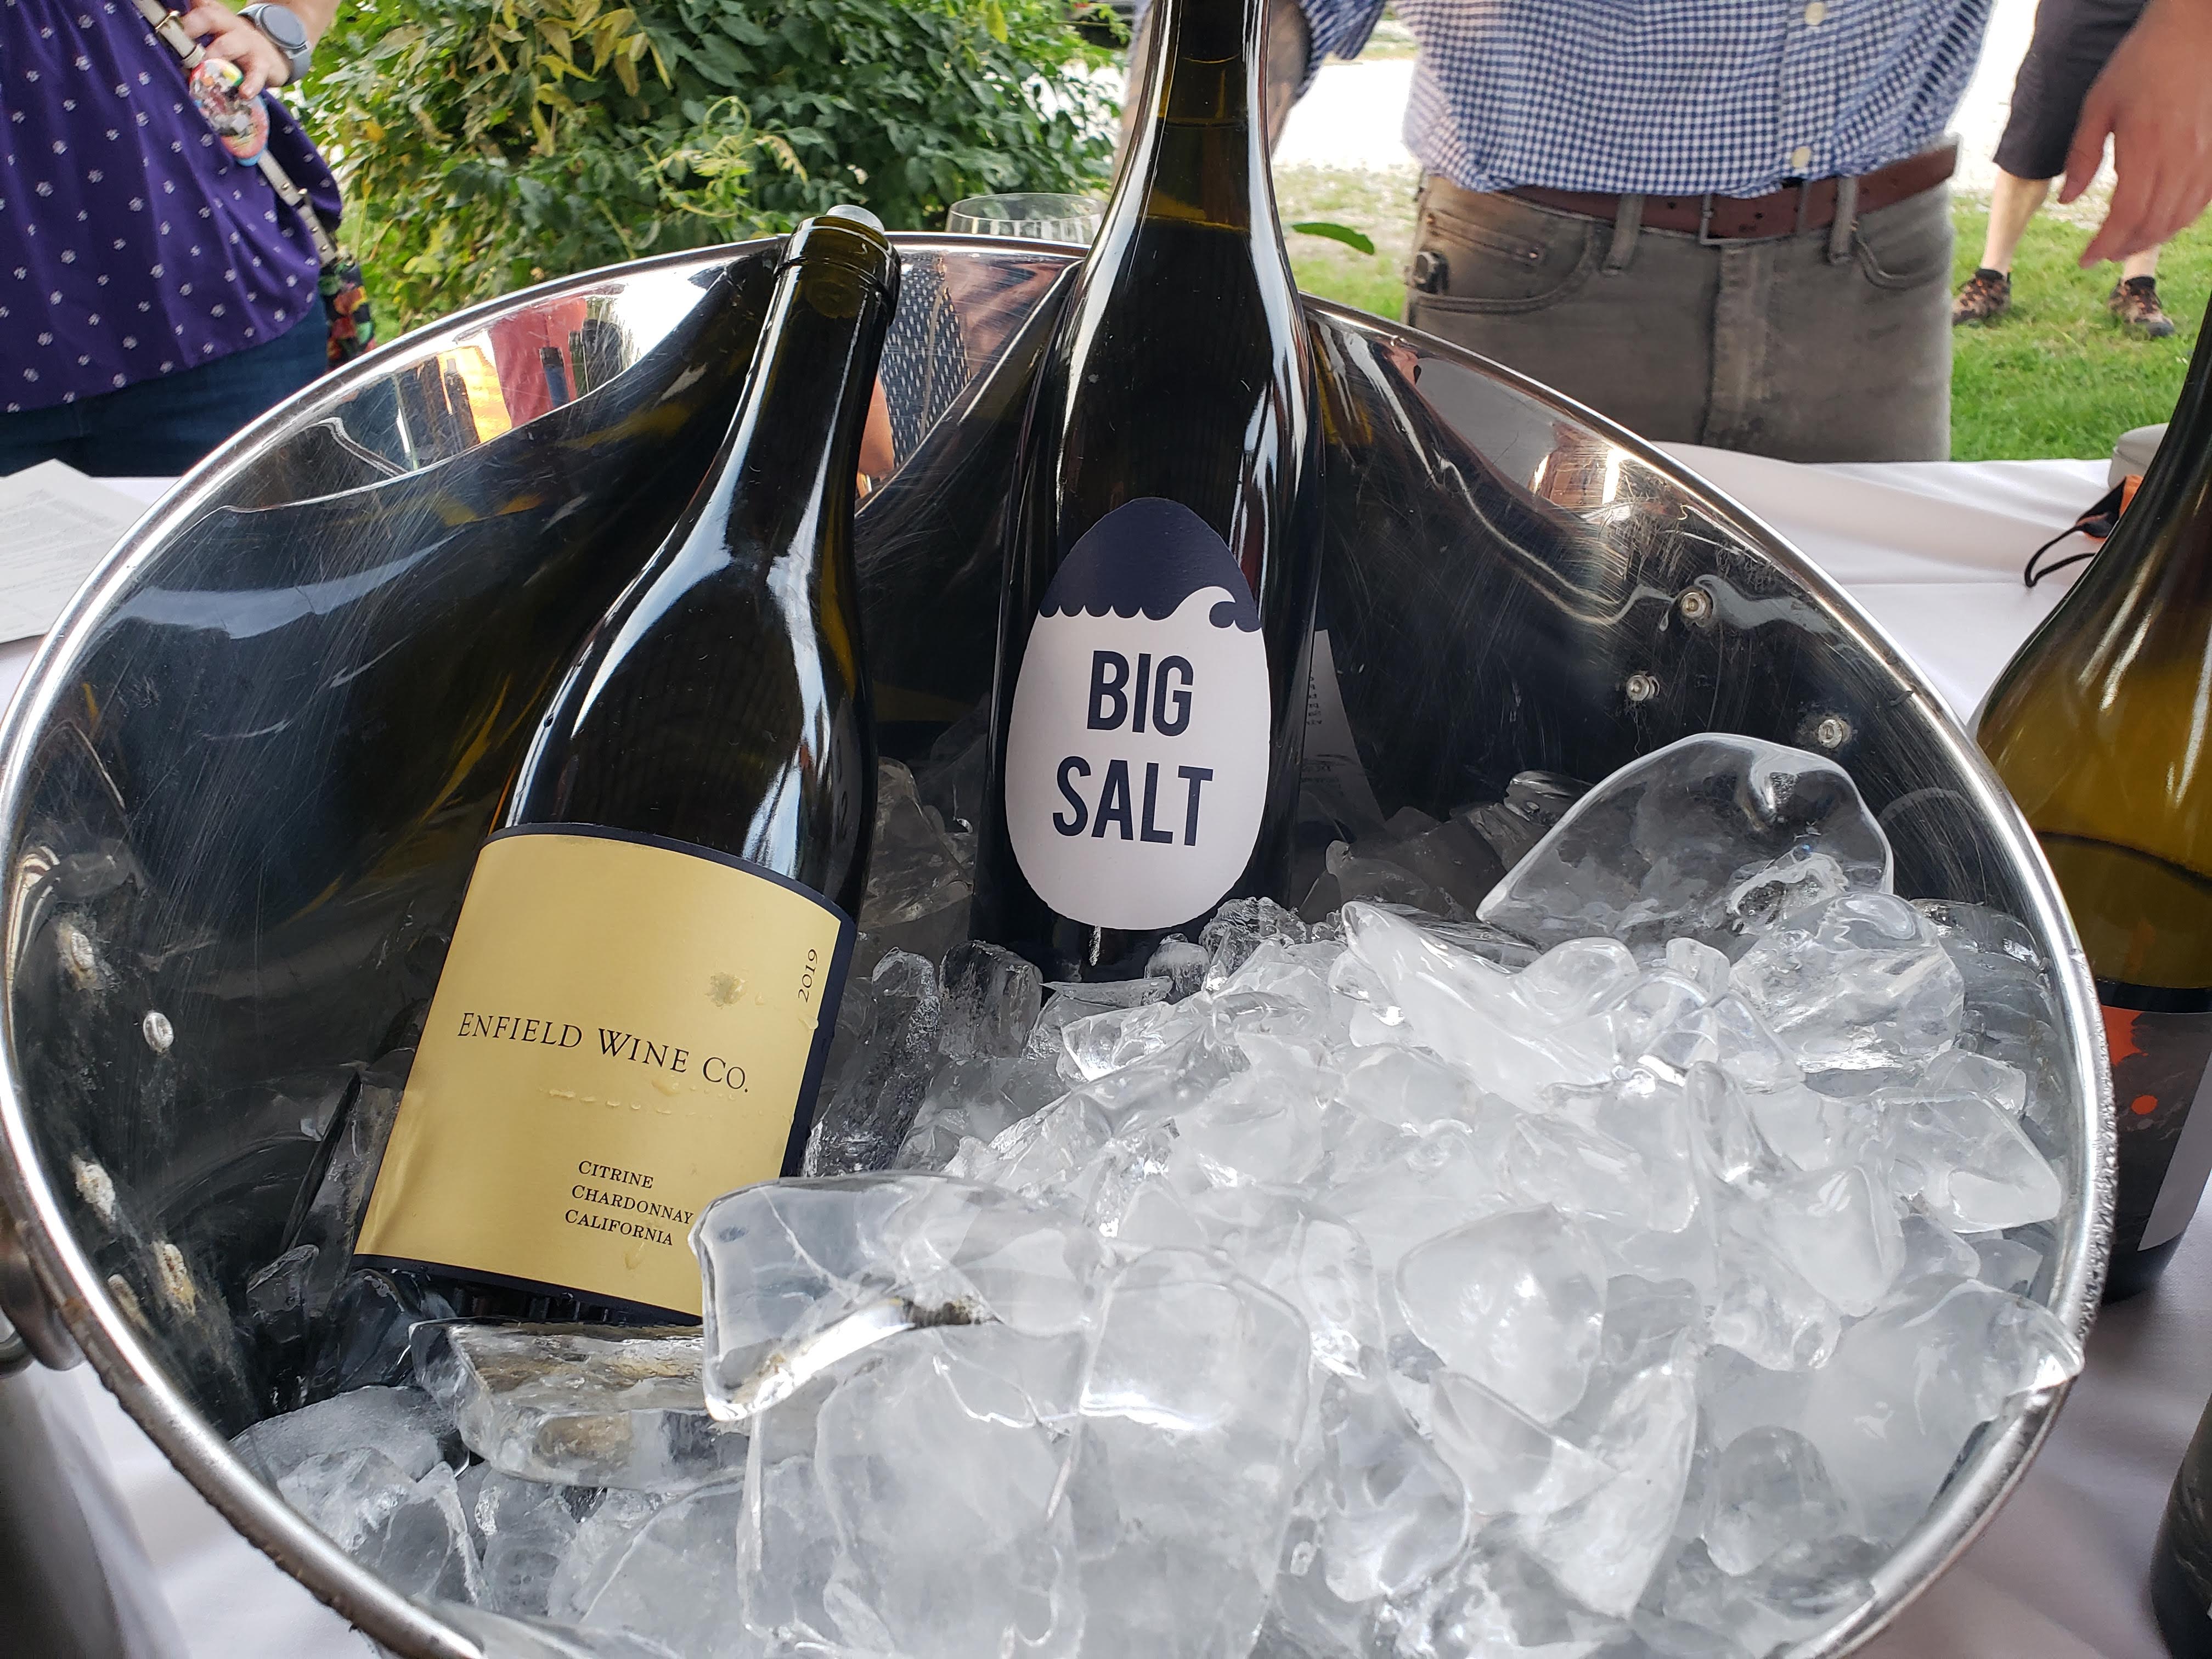 In a bucket of ice, there are two open wine bottles at an Art Mart + PFF tasting event. Photo by Sara Ressing.